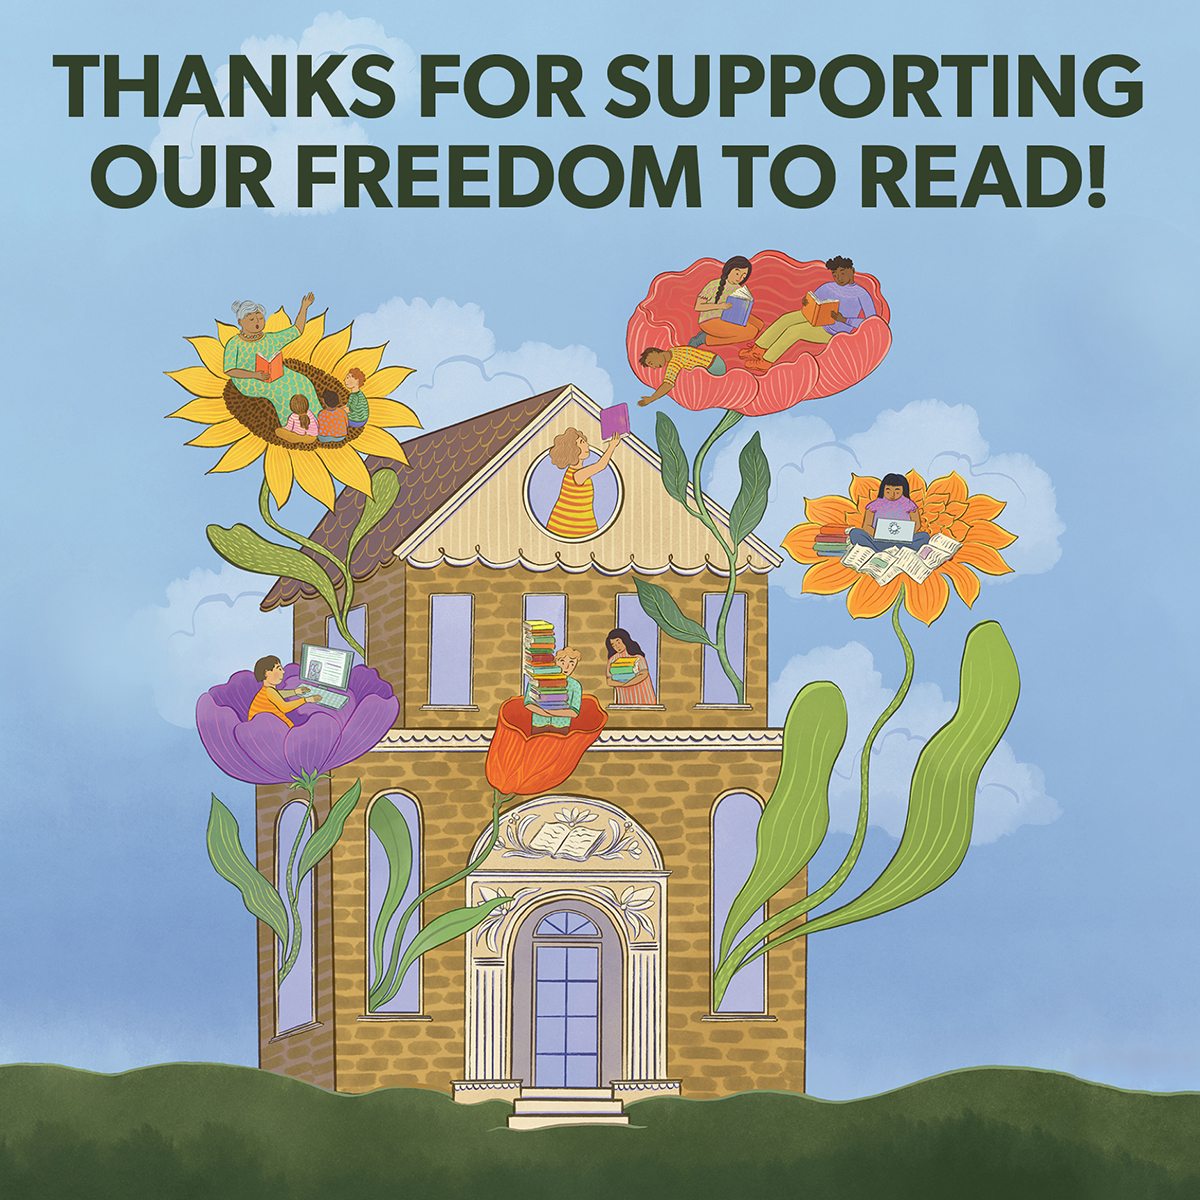 That wraps up another great #FTRWeek! 

Thank you to everyone who coordinated activities, participated in events, connected on social media or started a conversation about #FreedomToRead this week. Remember: we can protect and celebrate our freedom to read every day of the year!